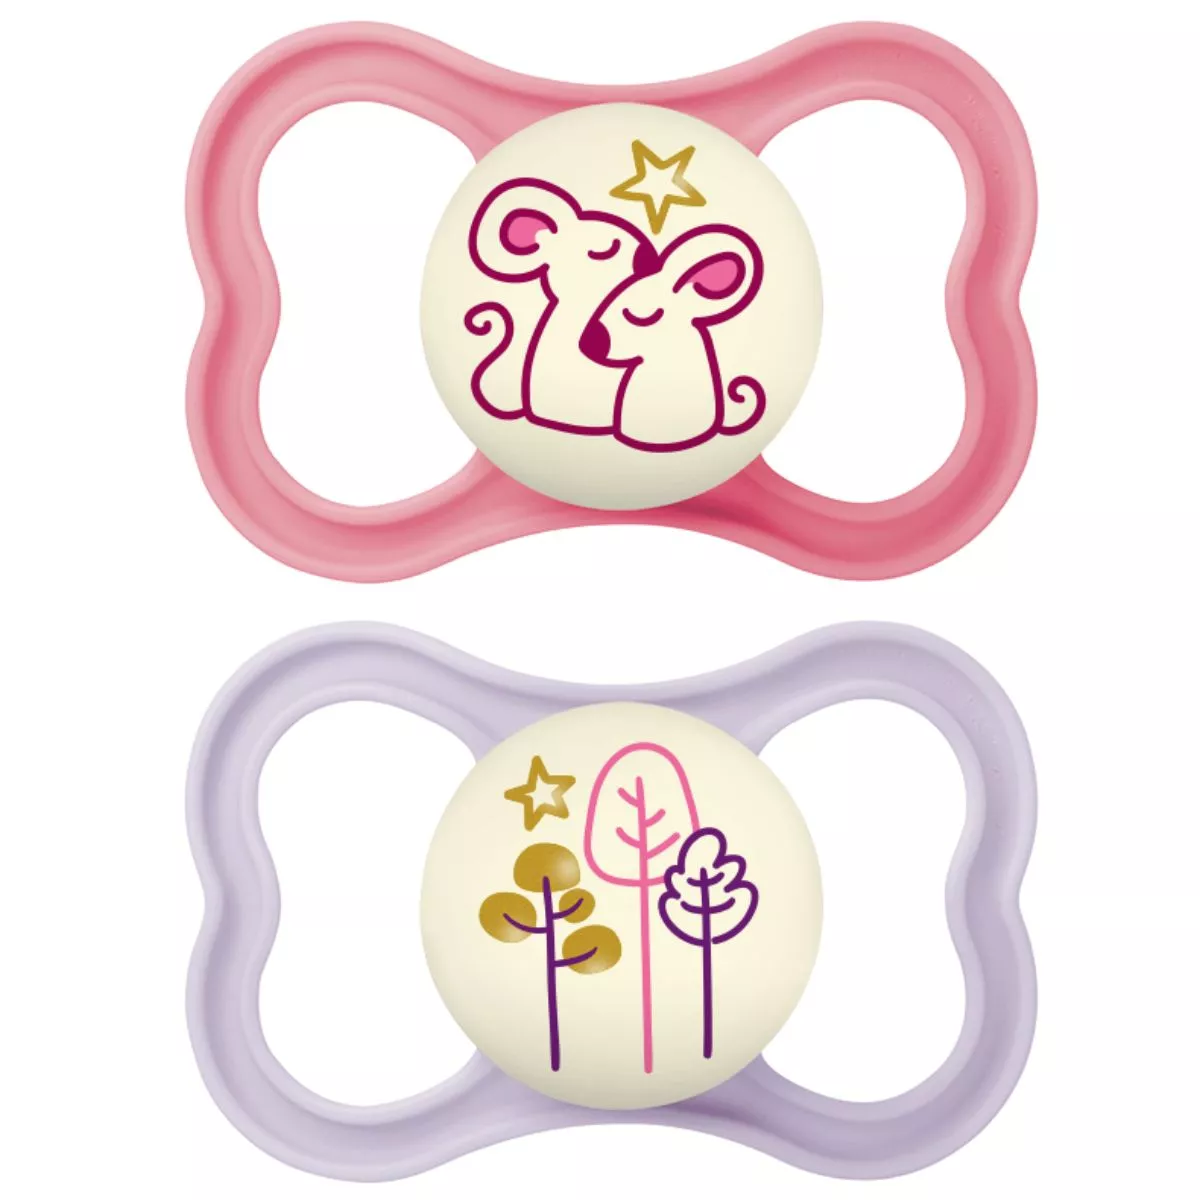 MAM Air Night Soother 16+ months, set of 2